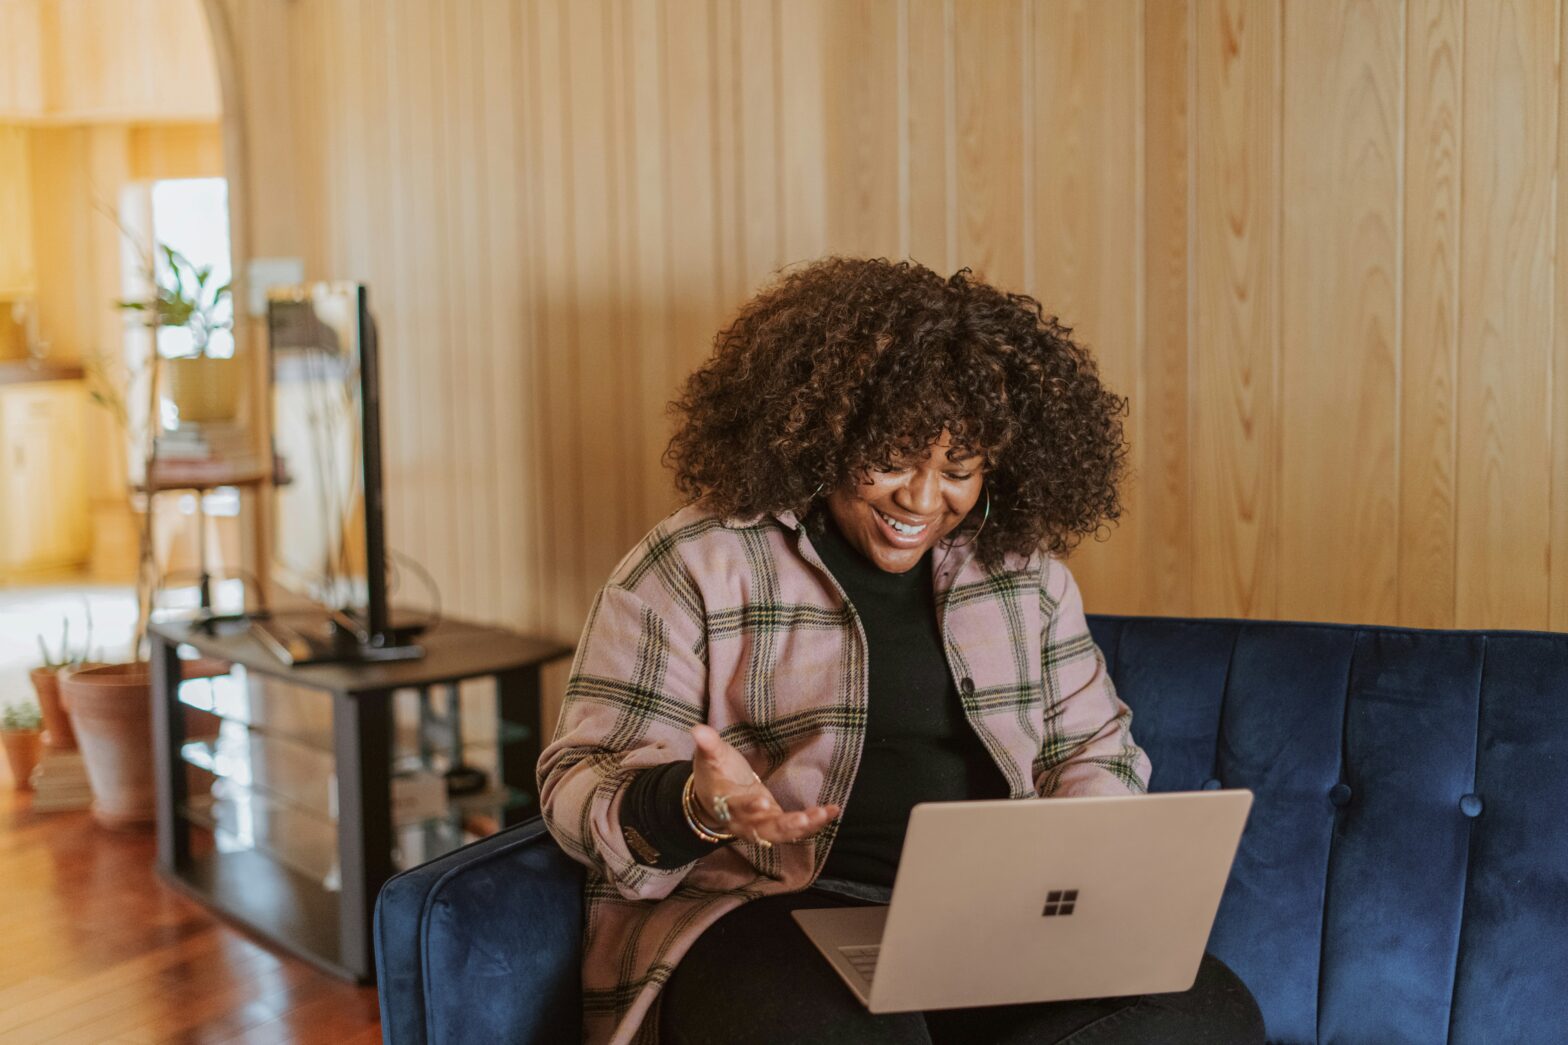 Long Distance Valentine's Ideas pictured: woman smiling at laptop